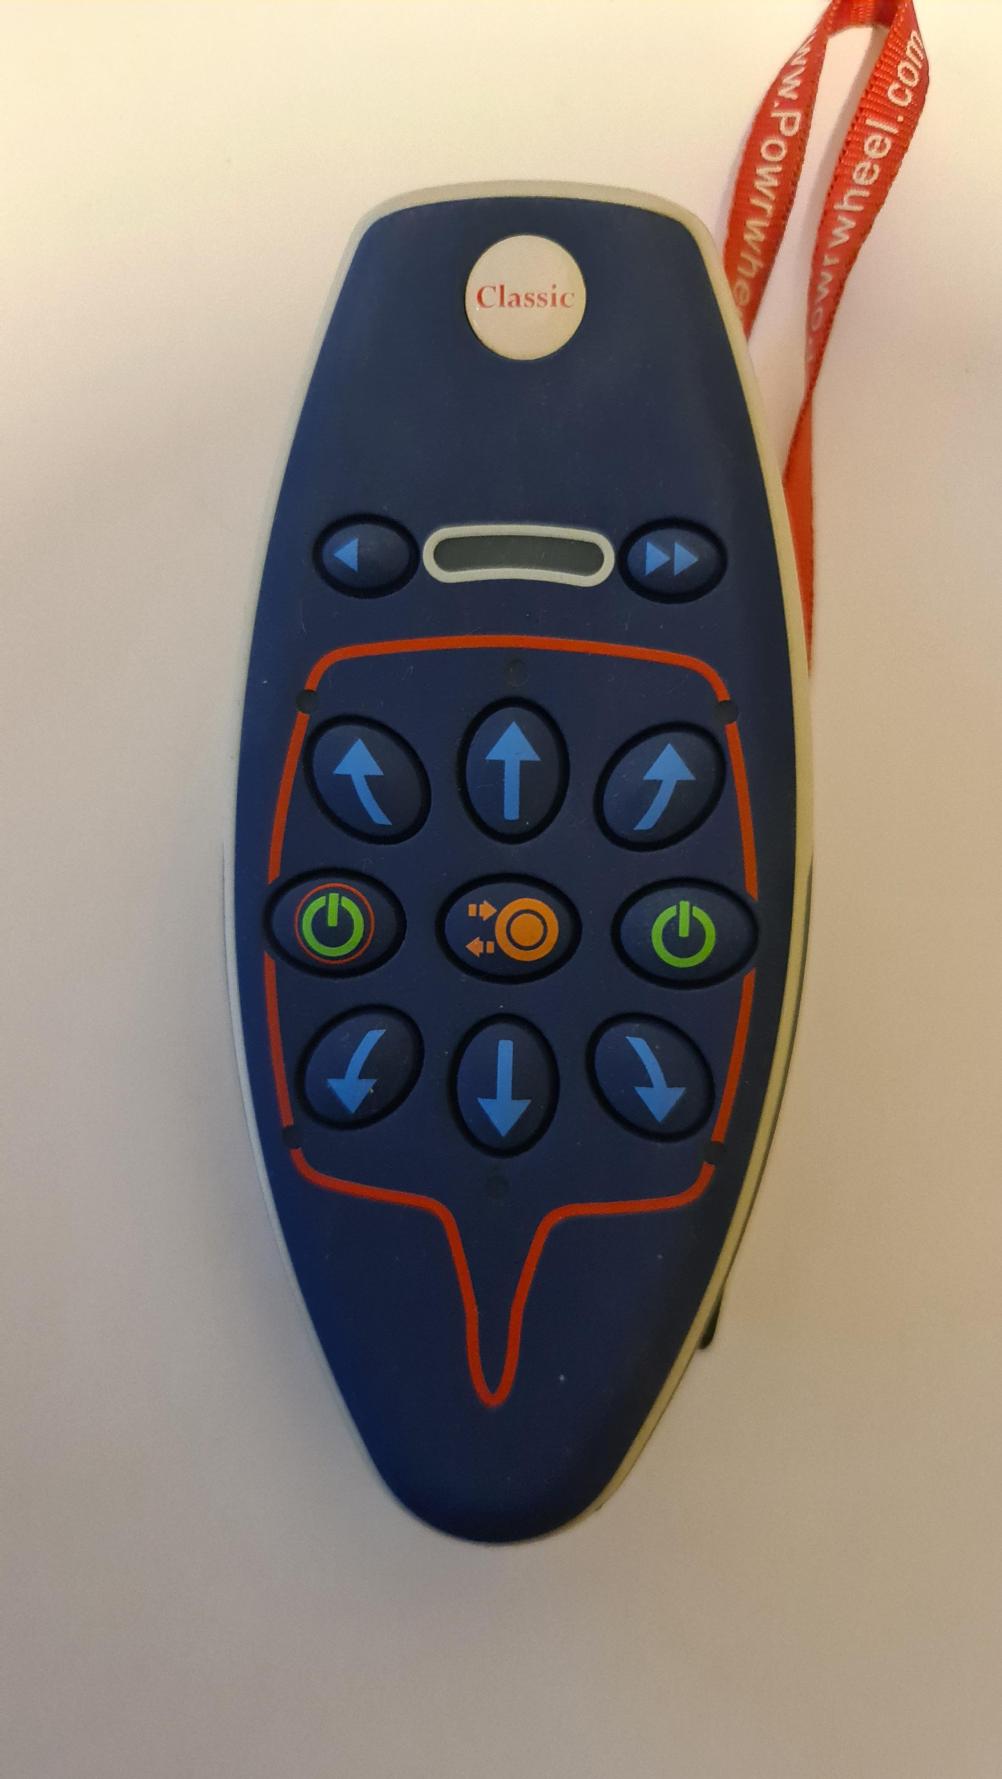 Power Touch  Classic  Remote Control - Front Image